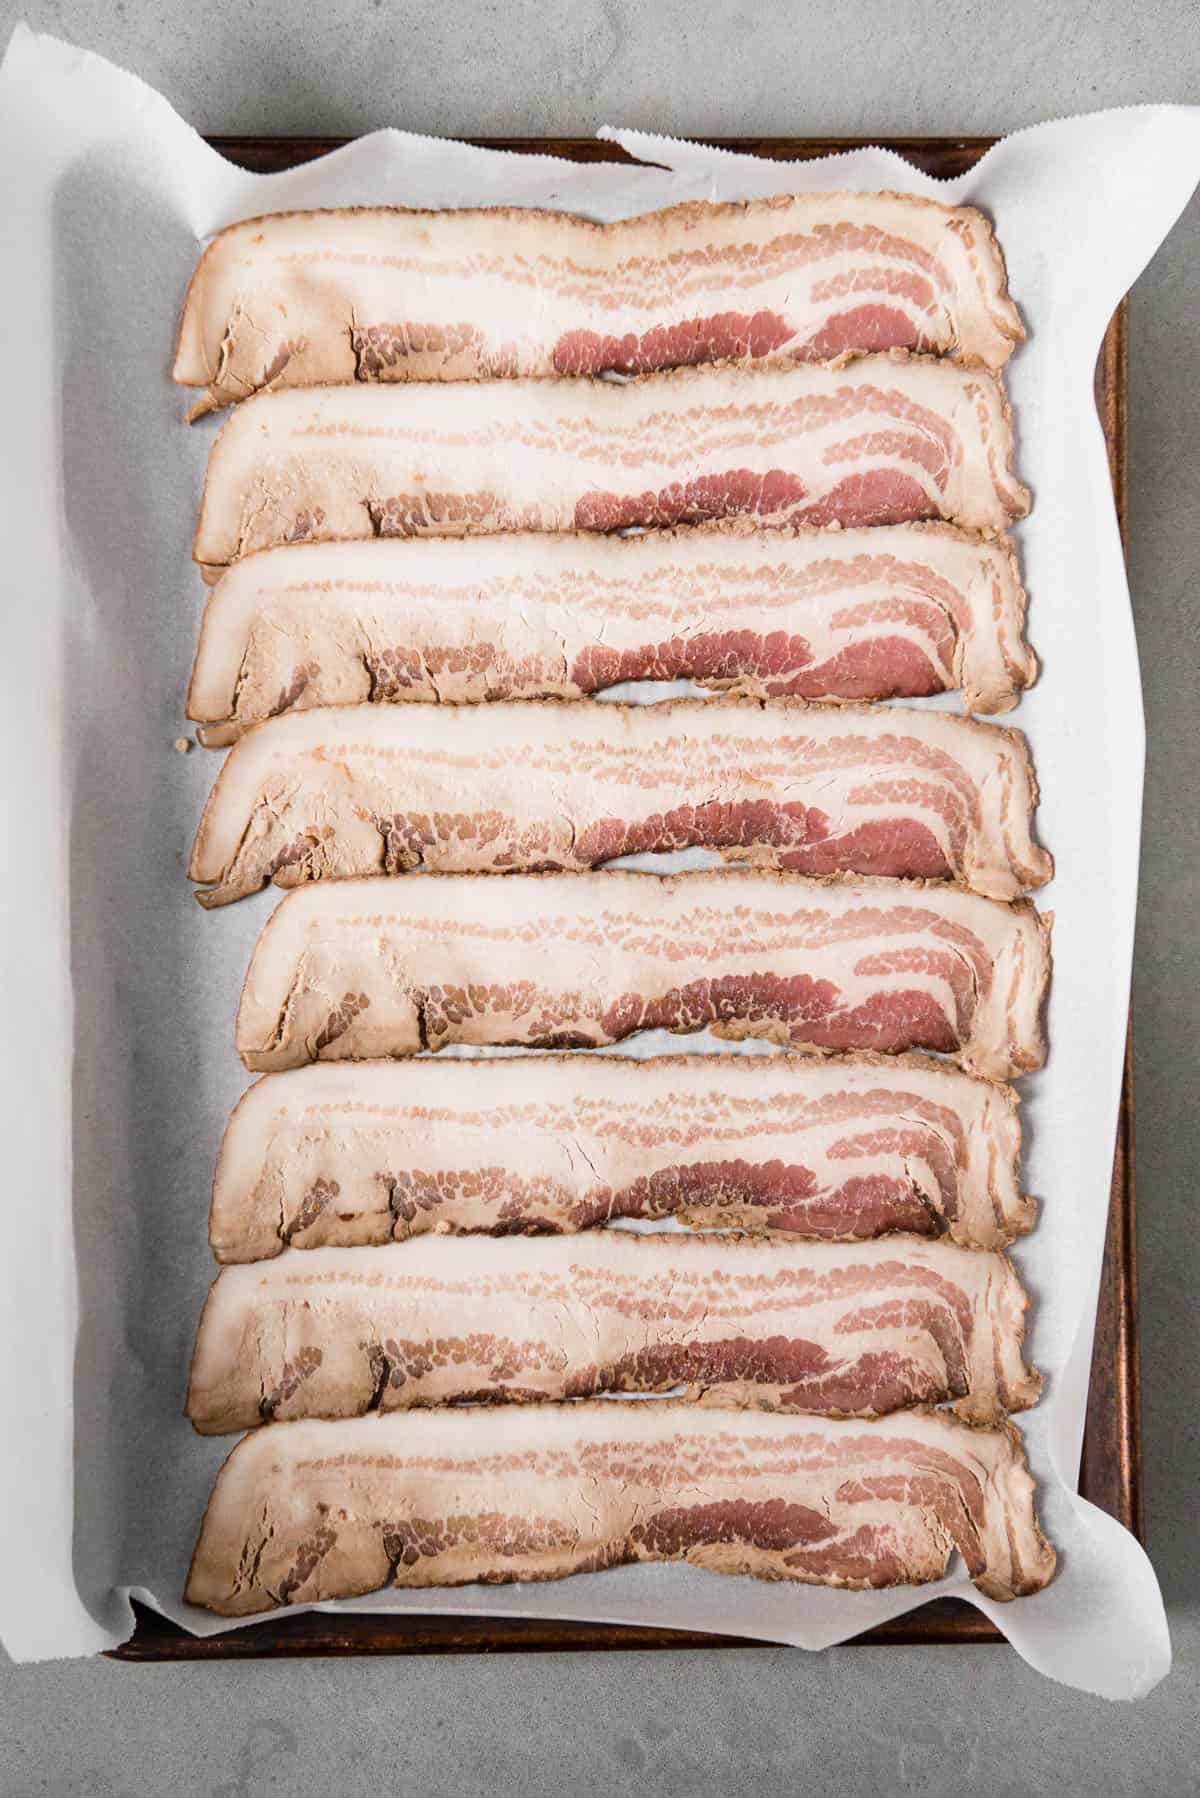 https://selfproclaimedfoodie.com/wp-content/uploads/cook-bacon-oven-self-proclaimed-foodie.jpg